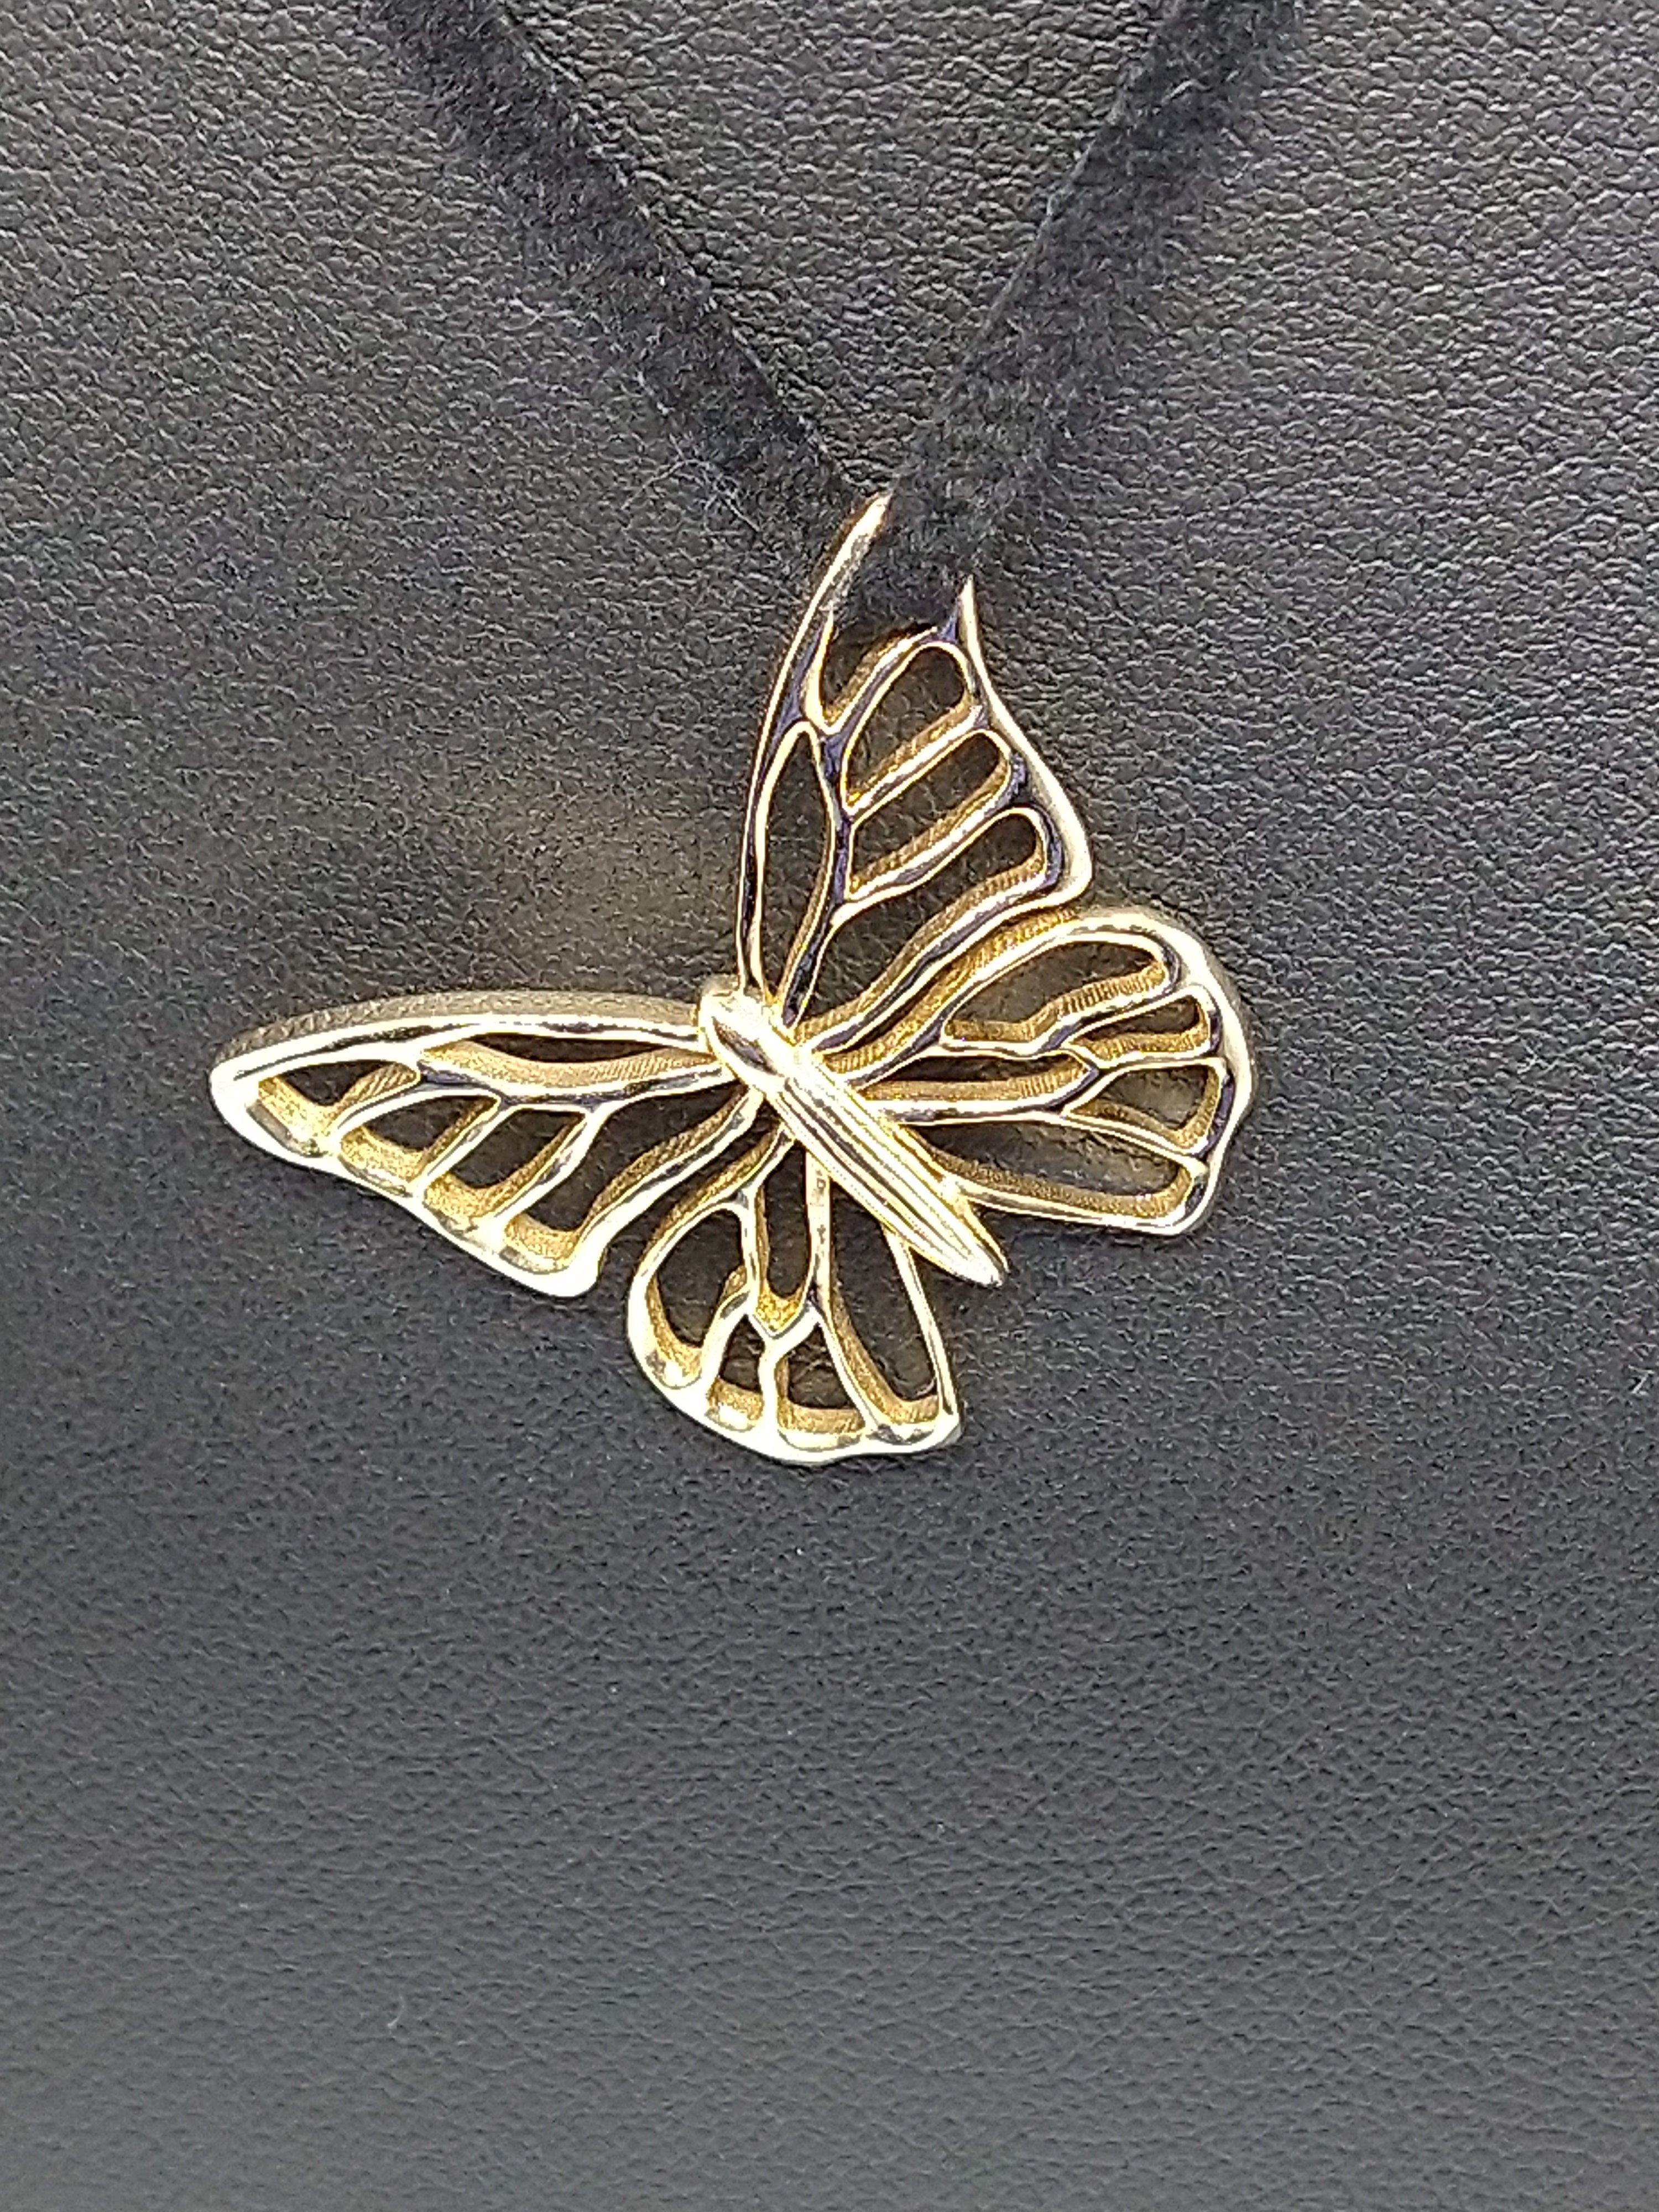 14 Karat Yellow Gold Butterfly Necklace on Suede For Sale